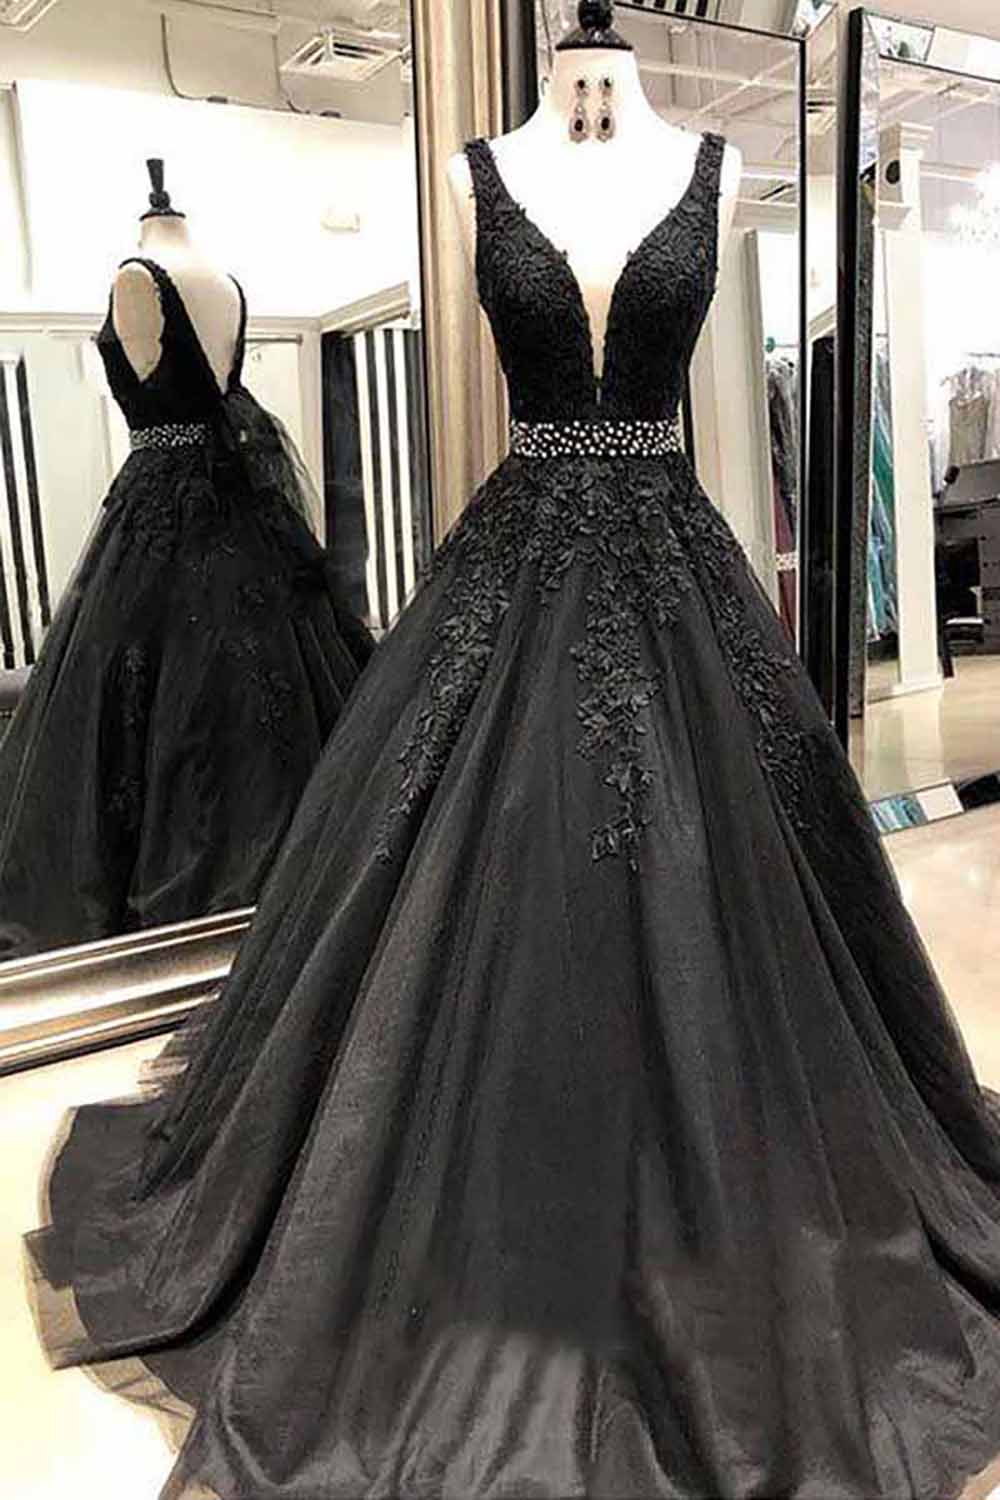 Black Long Prom Dresses with Beading V-Neck Ball Gown Tulle Appliques Lace Saudi Arabic Evening Dress Gown abiye gece elbisesi